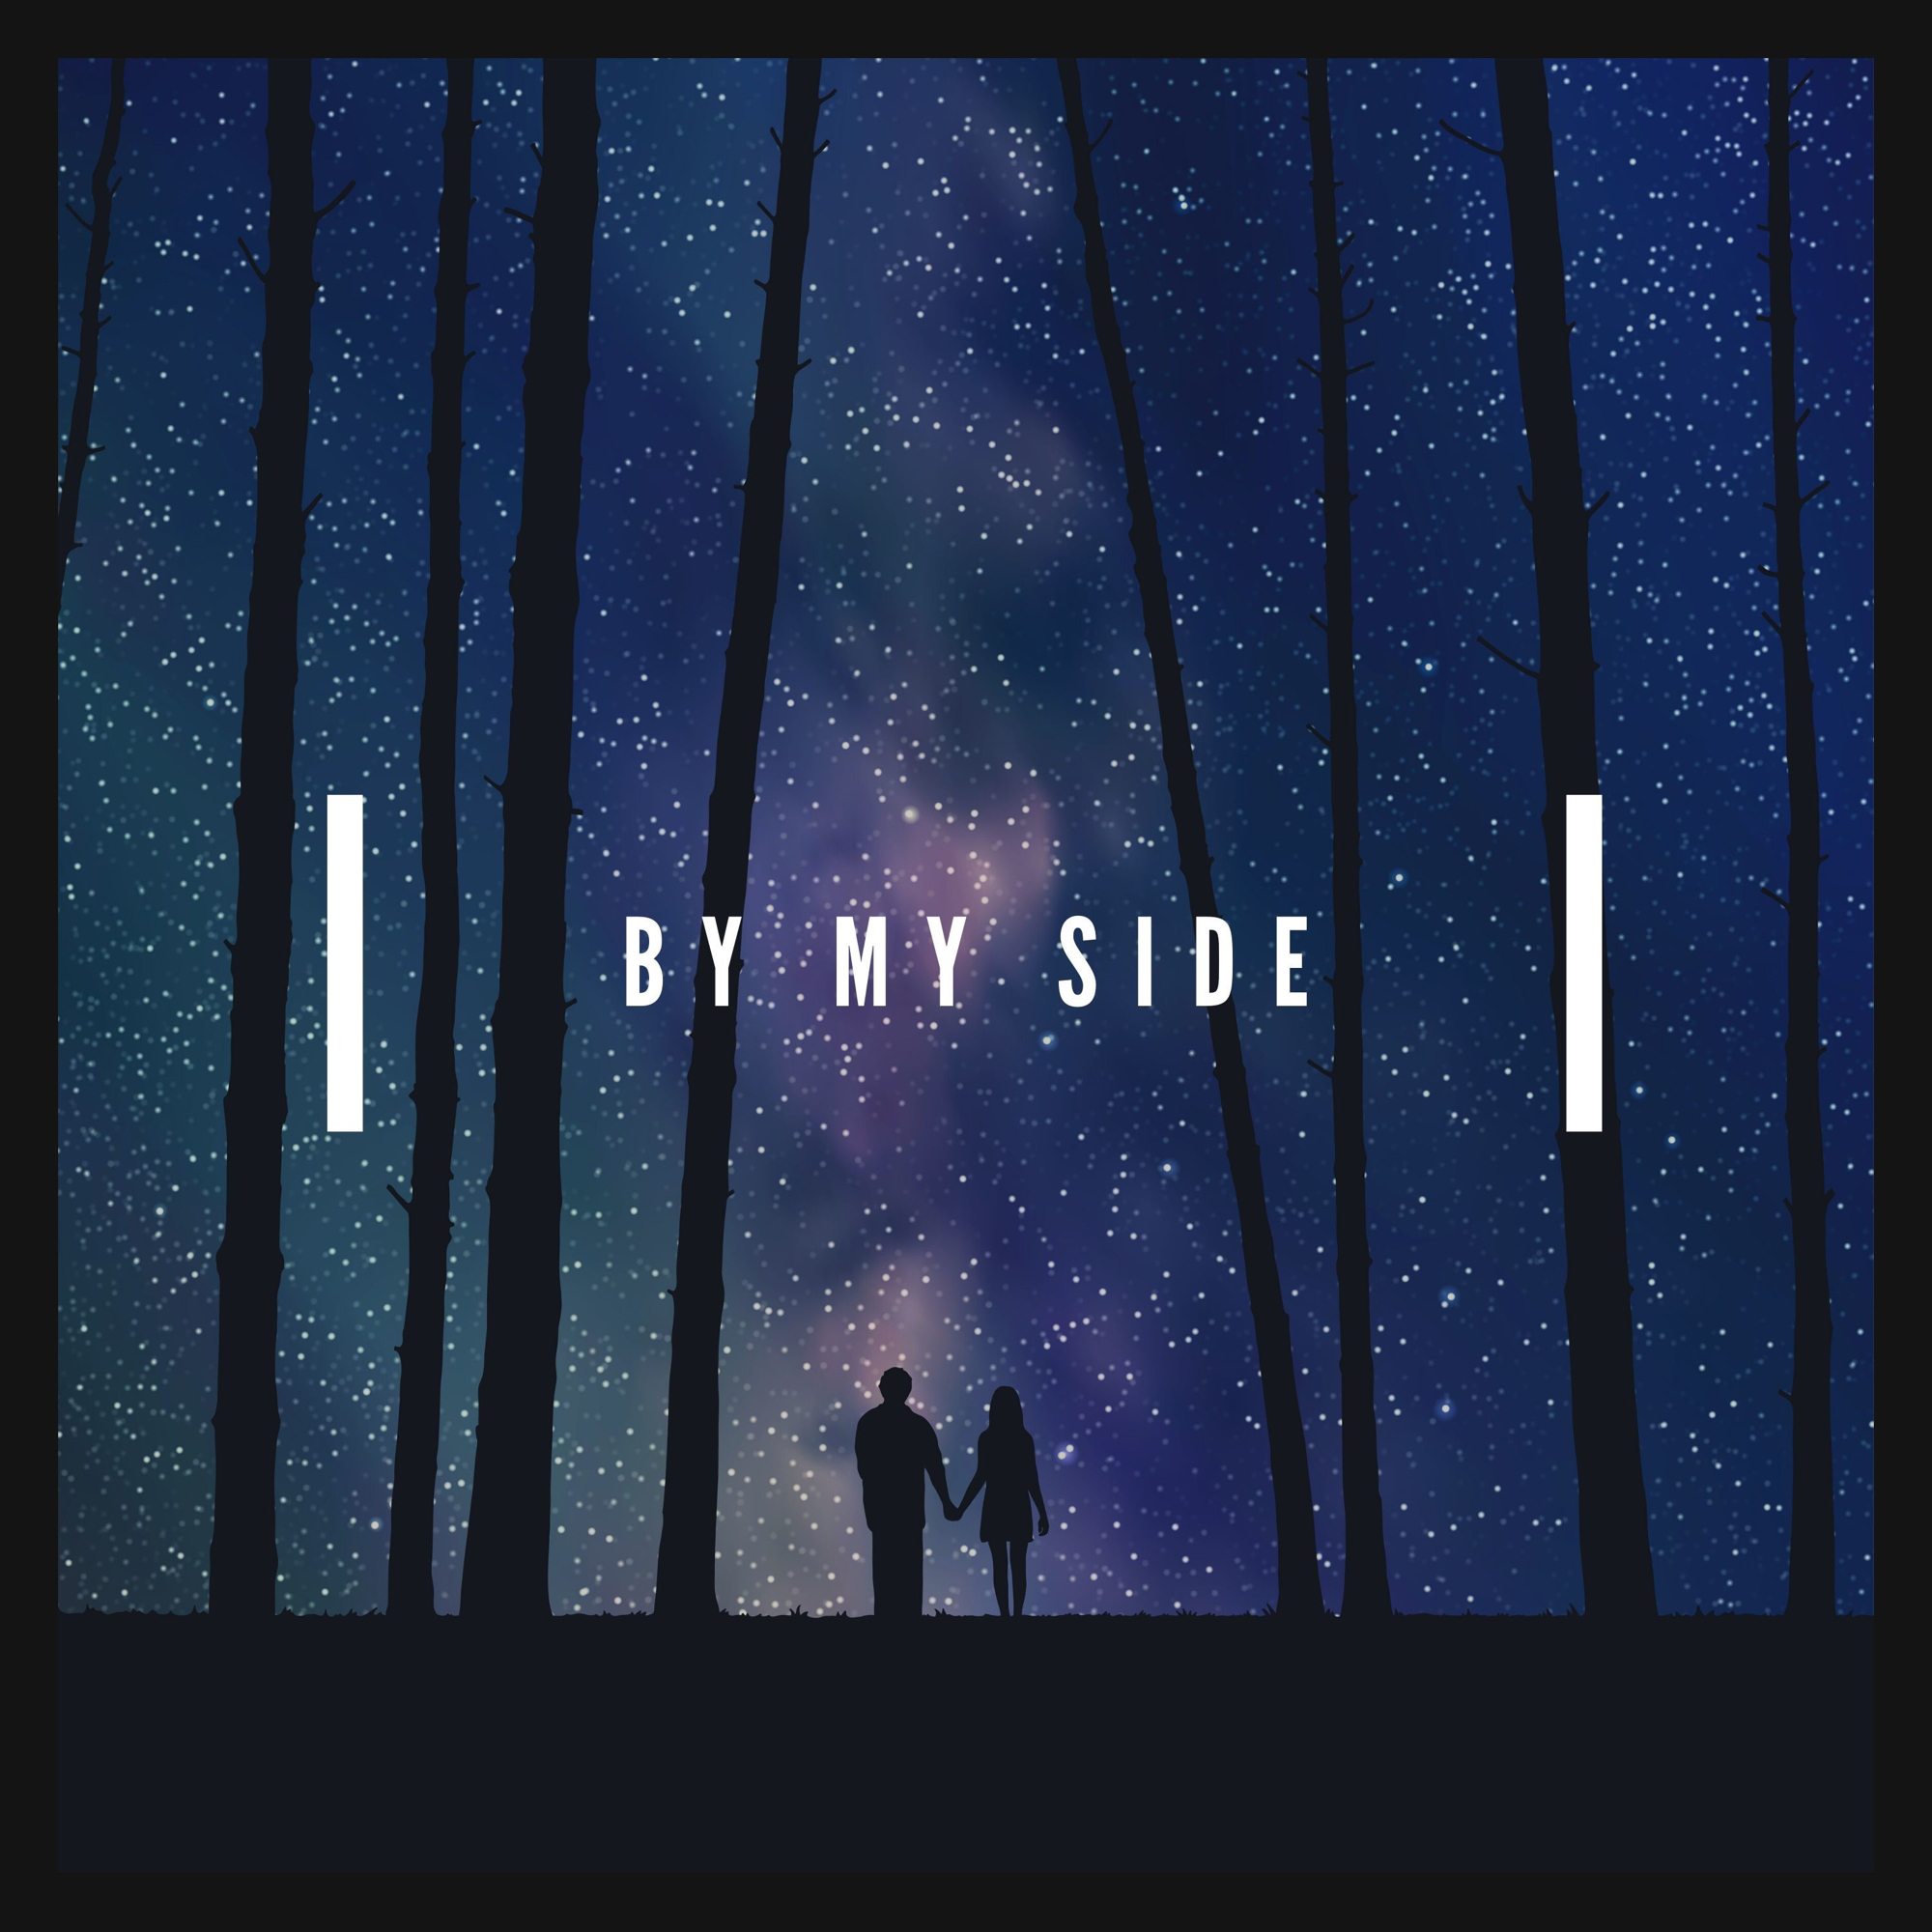 By my Side a7s. By your Side обложка. By my Side песня. Обложка by my Side. Stay by my side